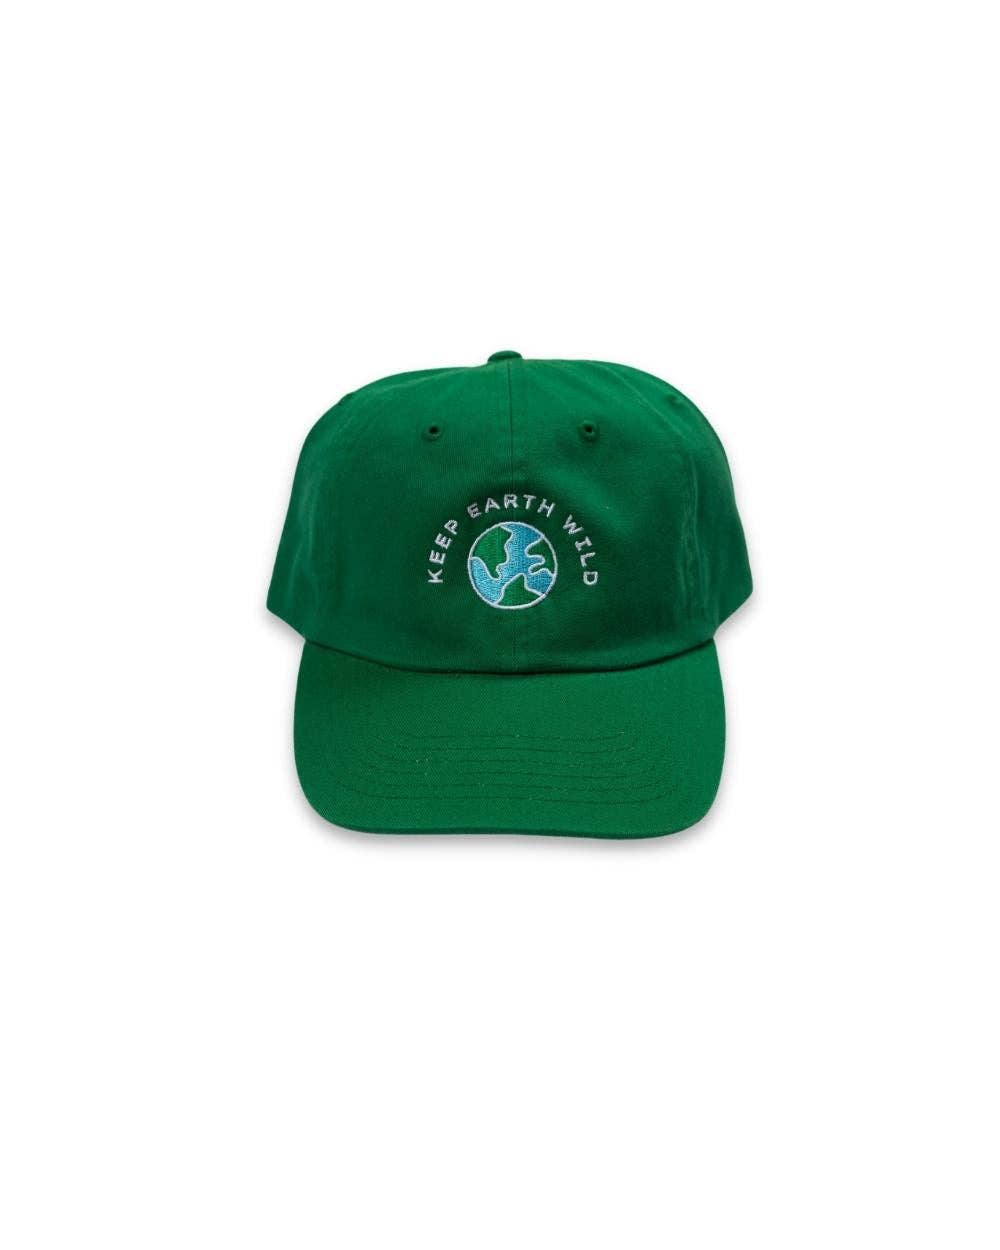 Green Keep Earth Wild dad hat by Keep Nature Wild